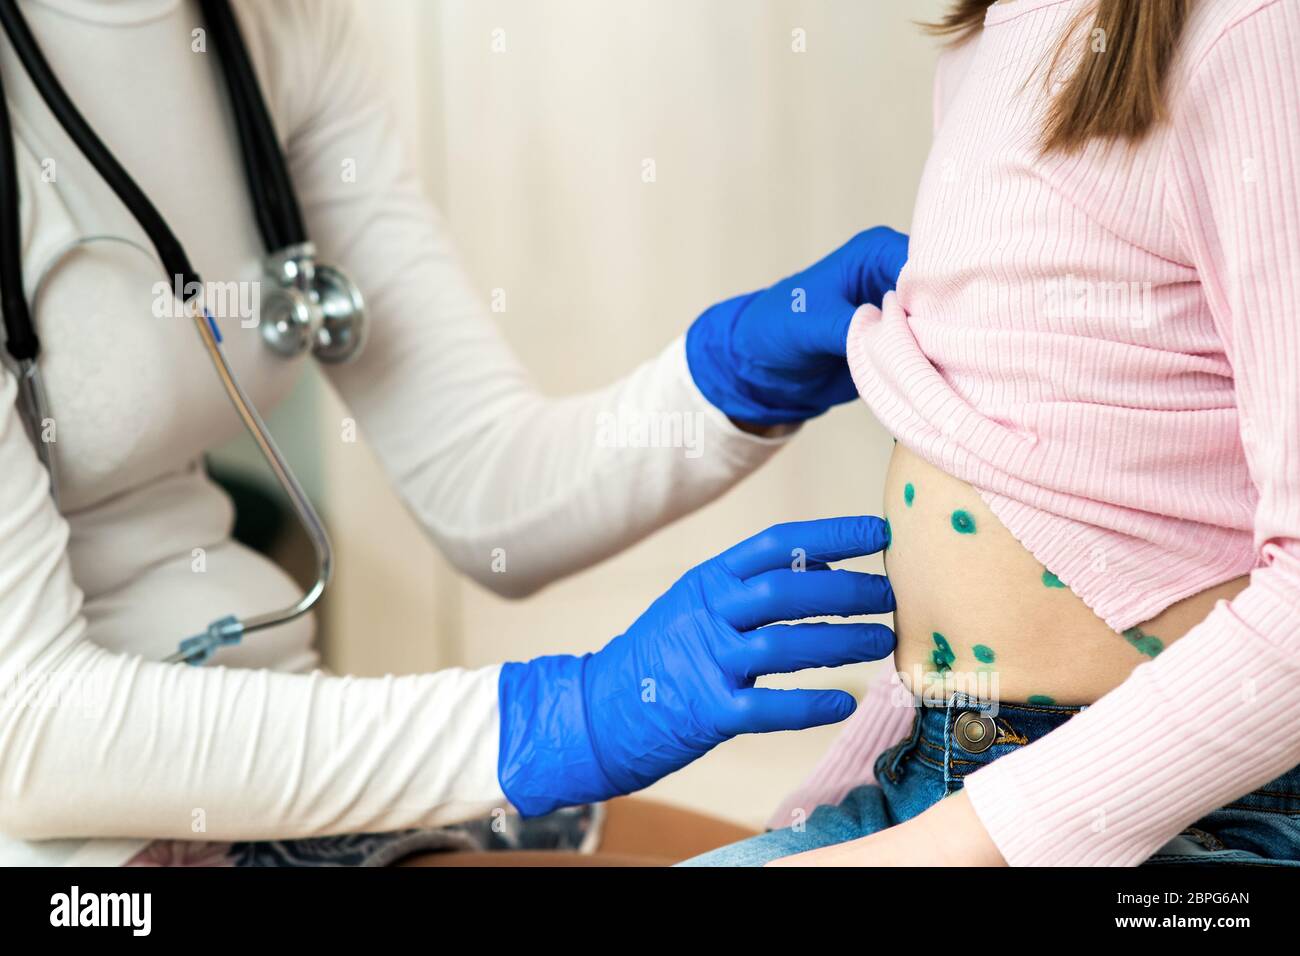 Doctor examining a child covered with green rashes on stomach ill with chickenpox, measles or rubella virus. Stock Photo